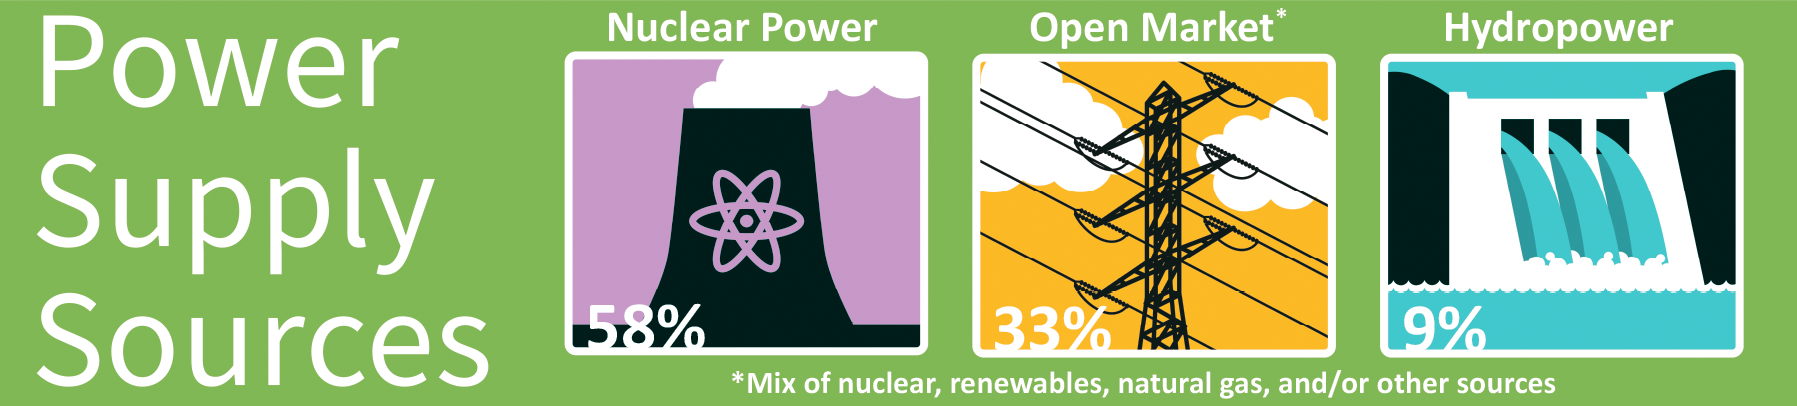 SREC Energy Sources - 58% Nuclear Power, 33% form the Open Market (a mix of nuclear, renewable, natural gas, and/or other sources), 9% Hydropower